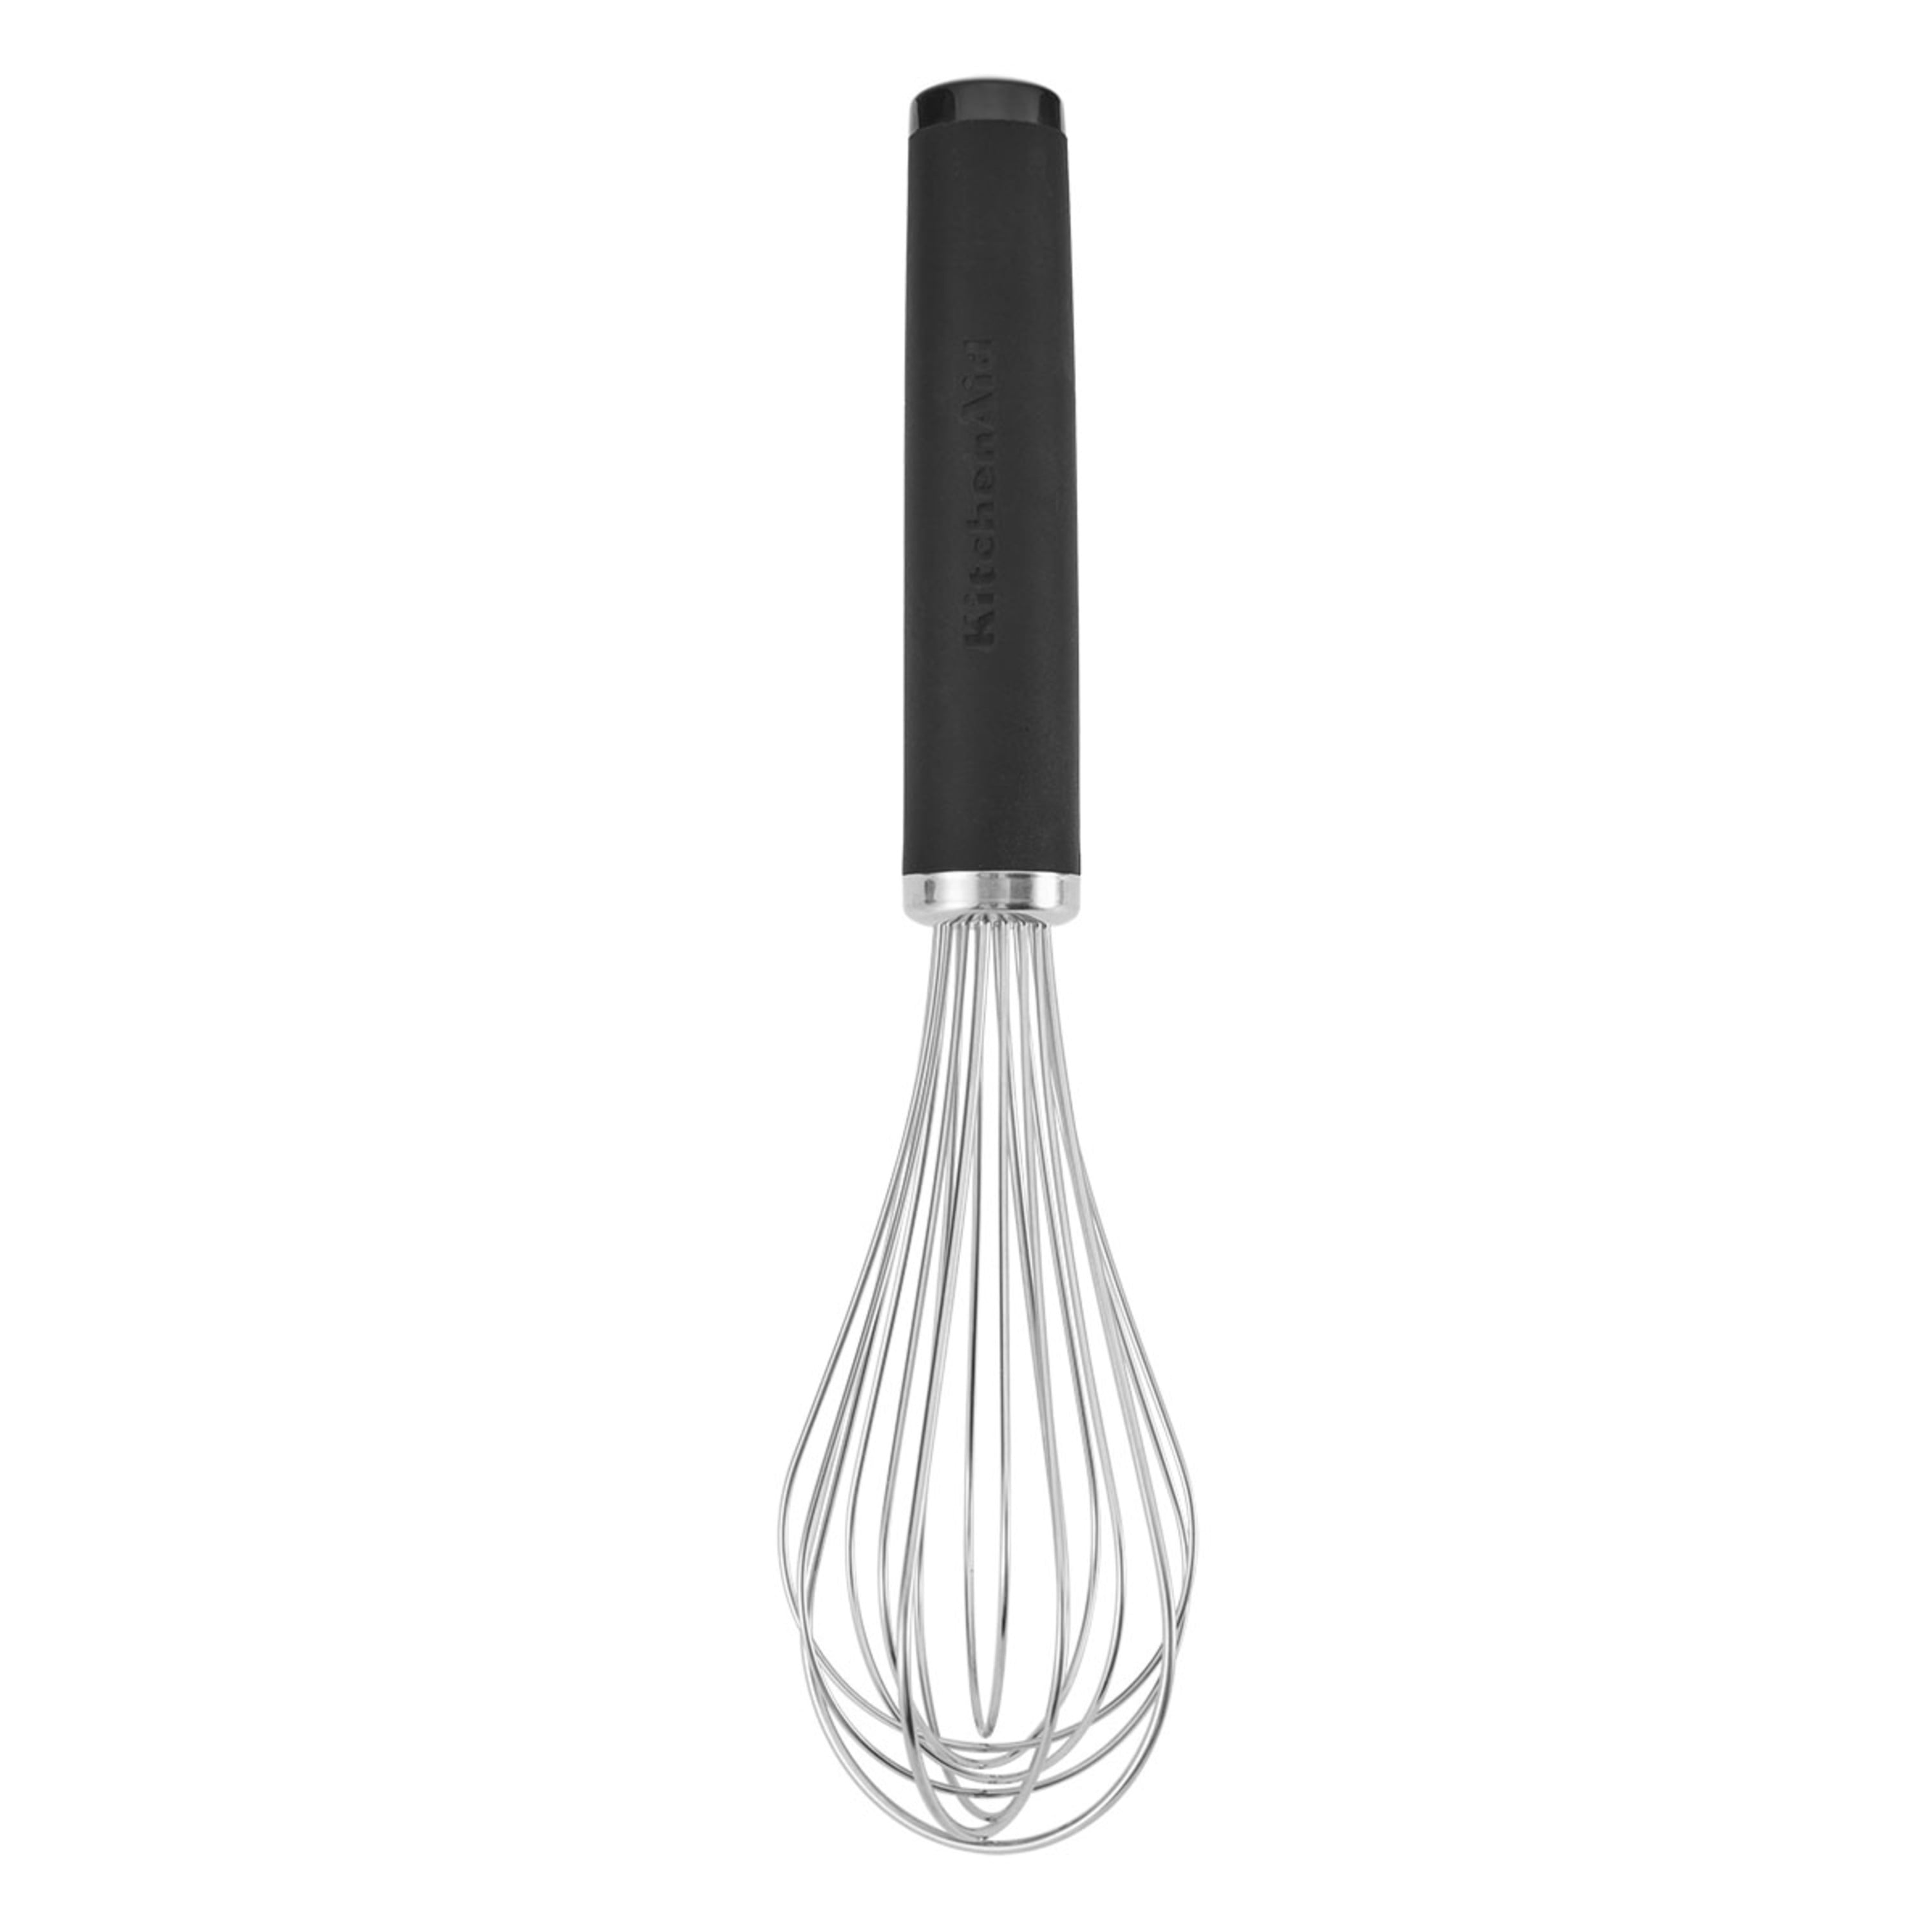 KITCHEN AID UTILITY WHISK LIGHT GREEN STURDY STAINLESS STEEL WIRES